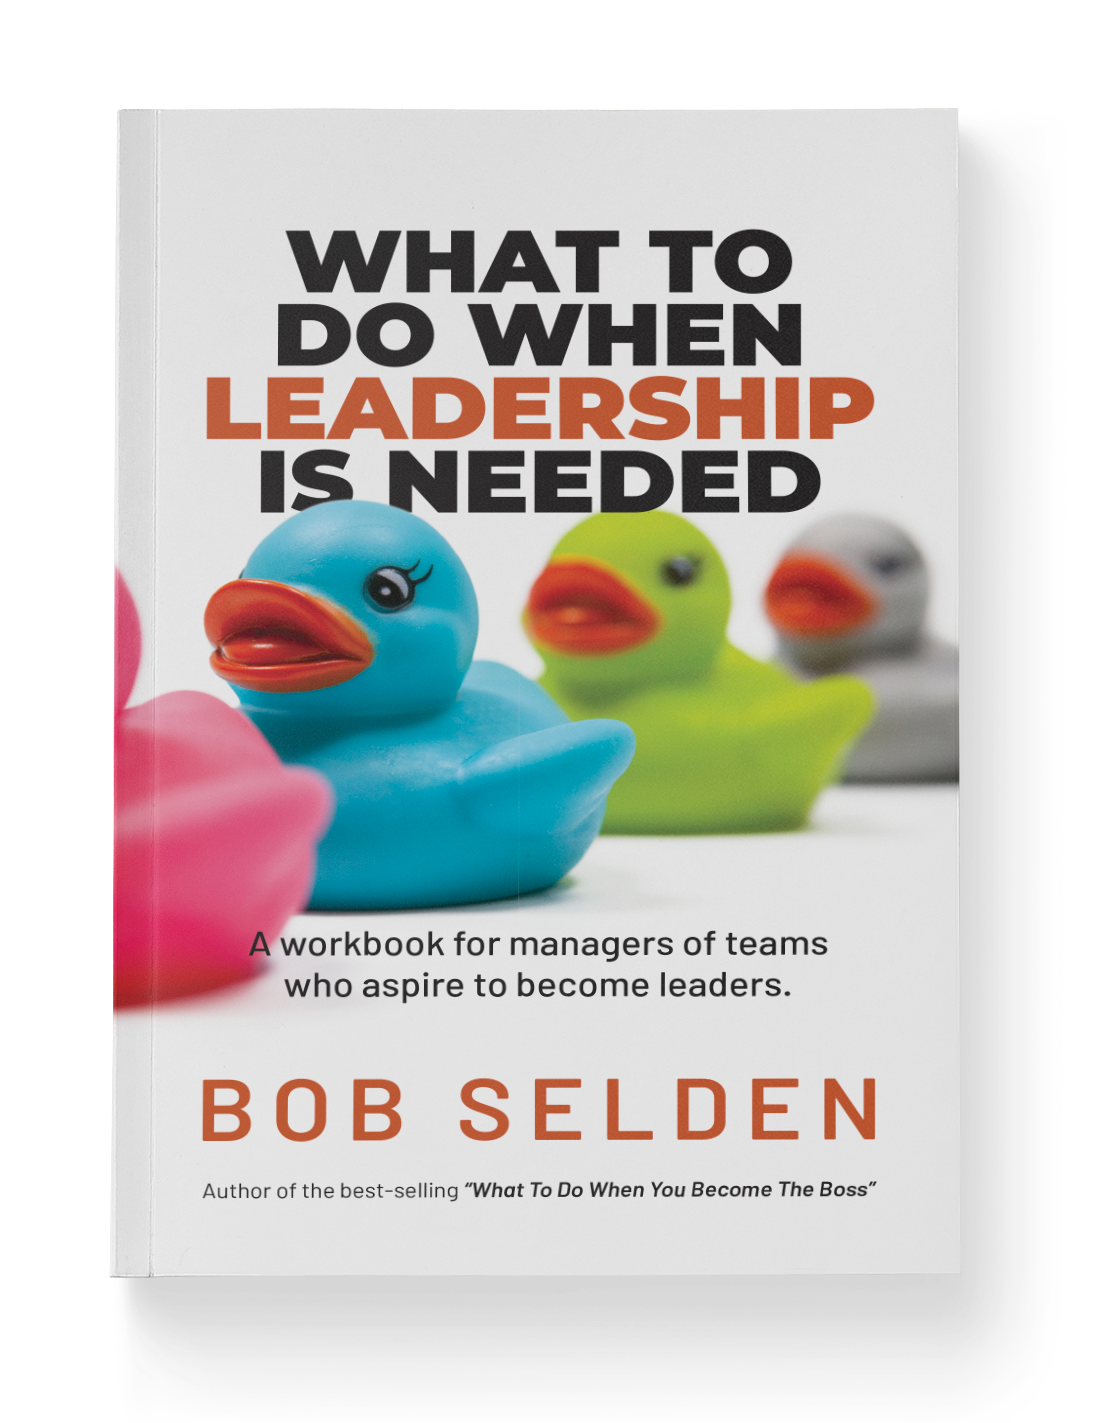 What To Do When Leadership is Needed